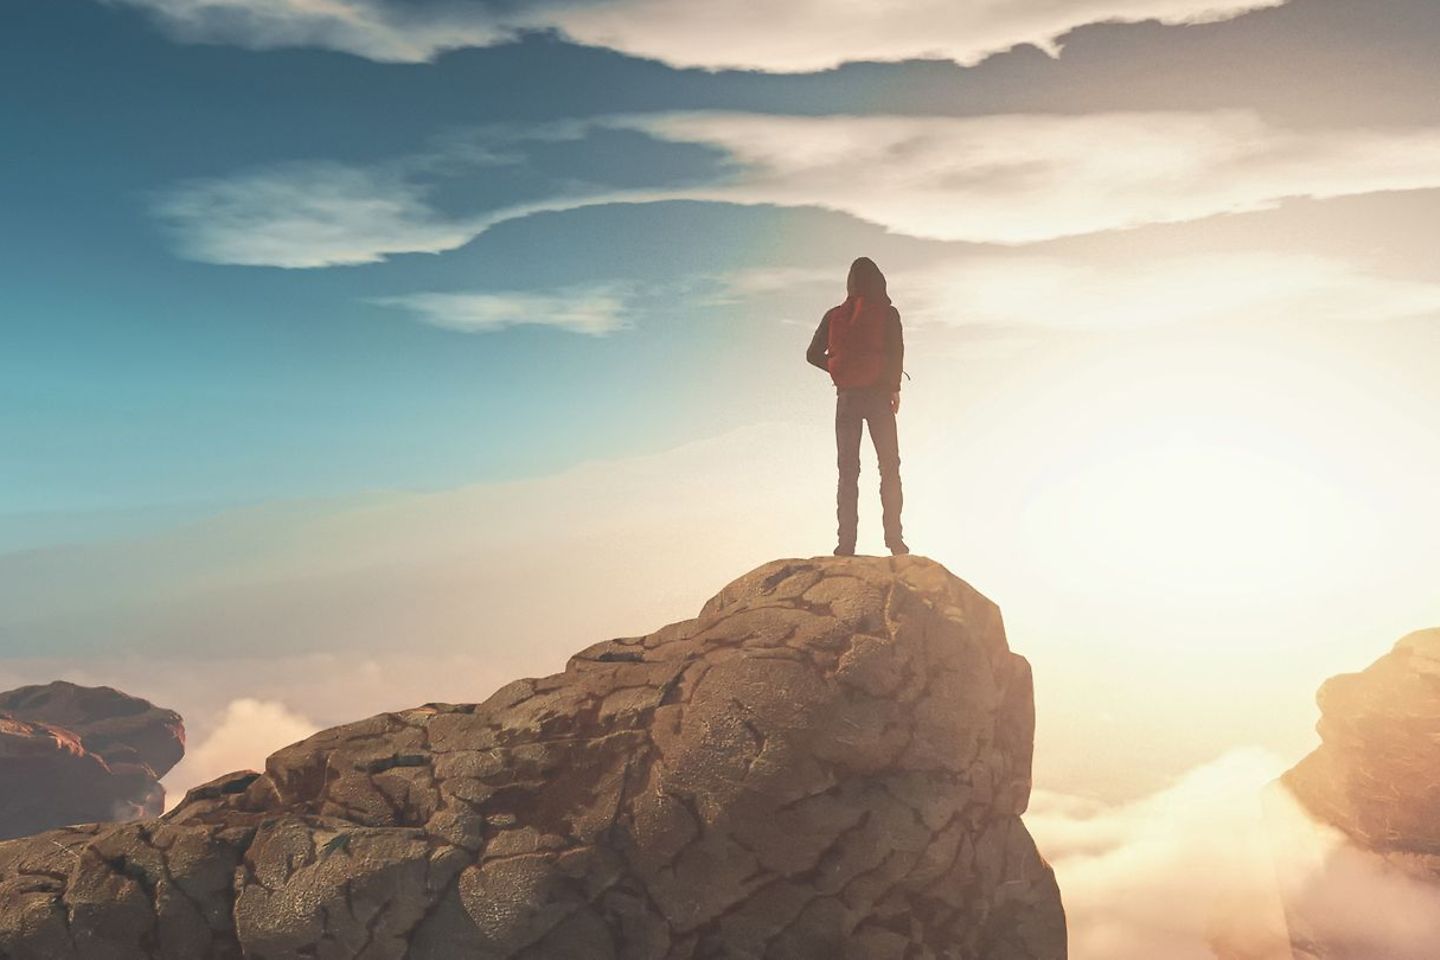 A man standing on a mountain top surrounded by clouds